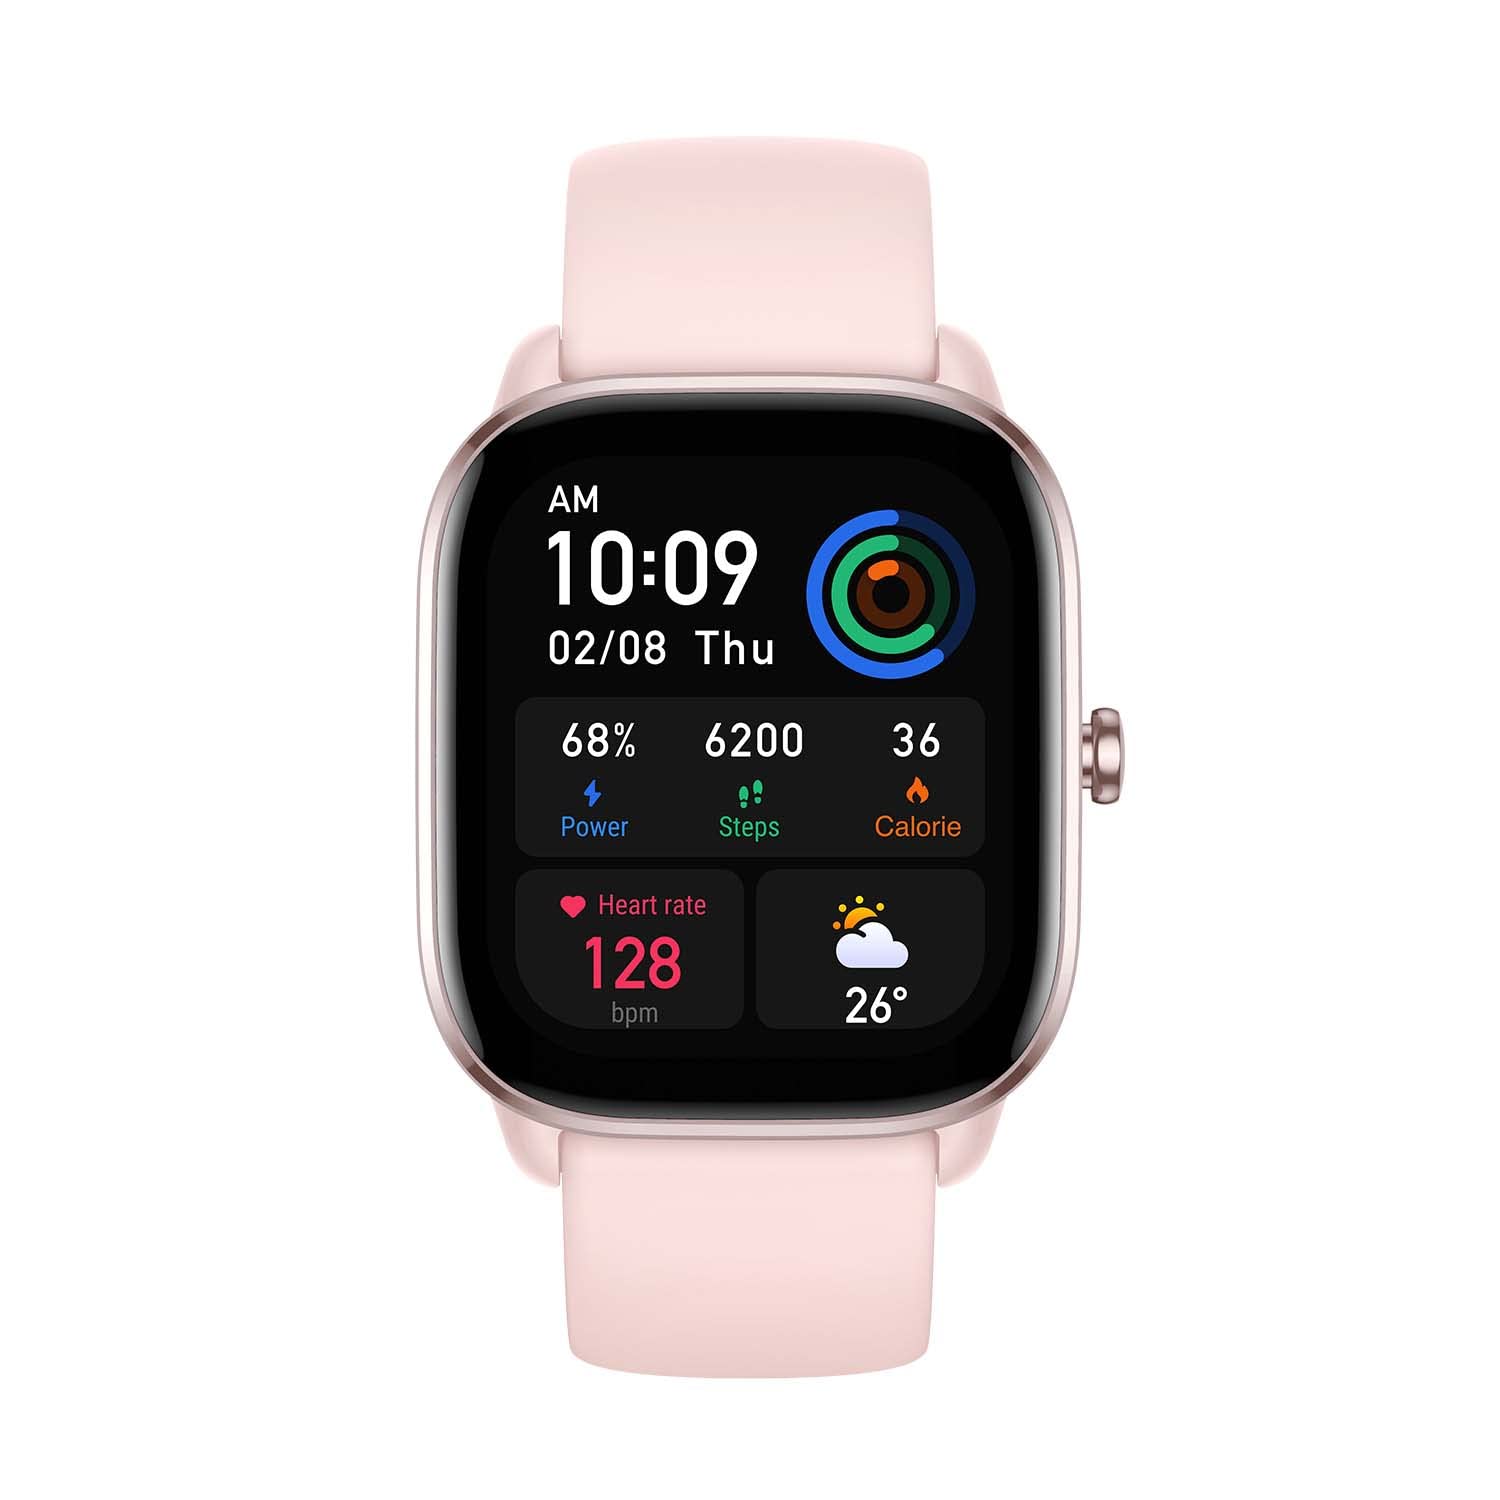 Amazfit GTS 4 Mini Smart Watch for Women Men, Alexa Built-in, GPS, Fitness Tracker with 120+ Sport Modes, 15-Day Battery Life, Heart Rate Blood Oxygen Monitor, Android Phone iPhone Compatible-Pink